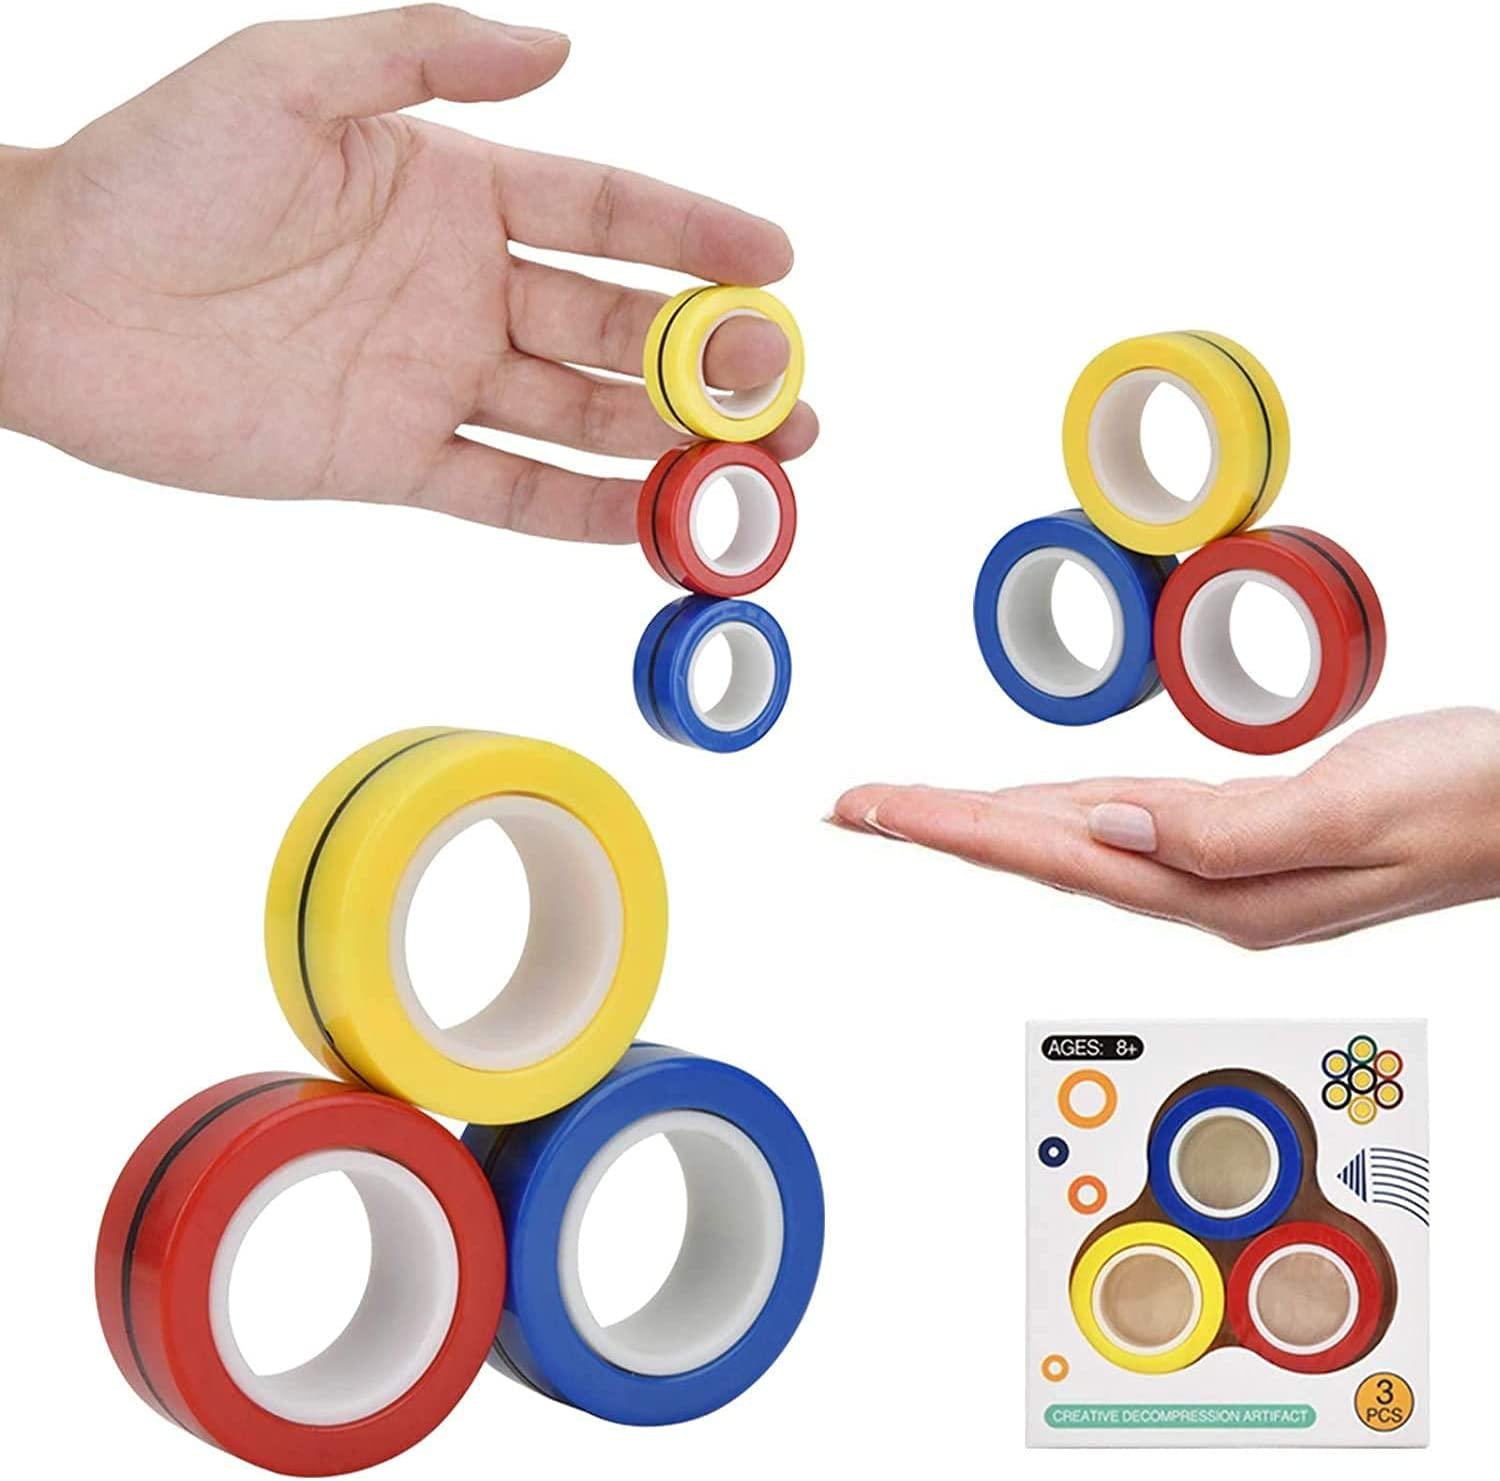 Jdox, Magnetic Fidget Rings, Magnetic Rings Fidget Toy, Set of 3, Fidget Finger Toy, ADHD Fidget Toys for Anxiety Teens